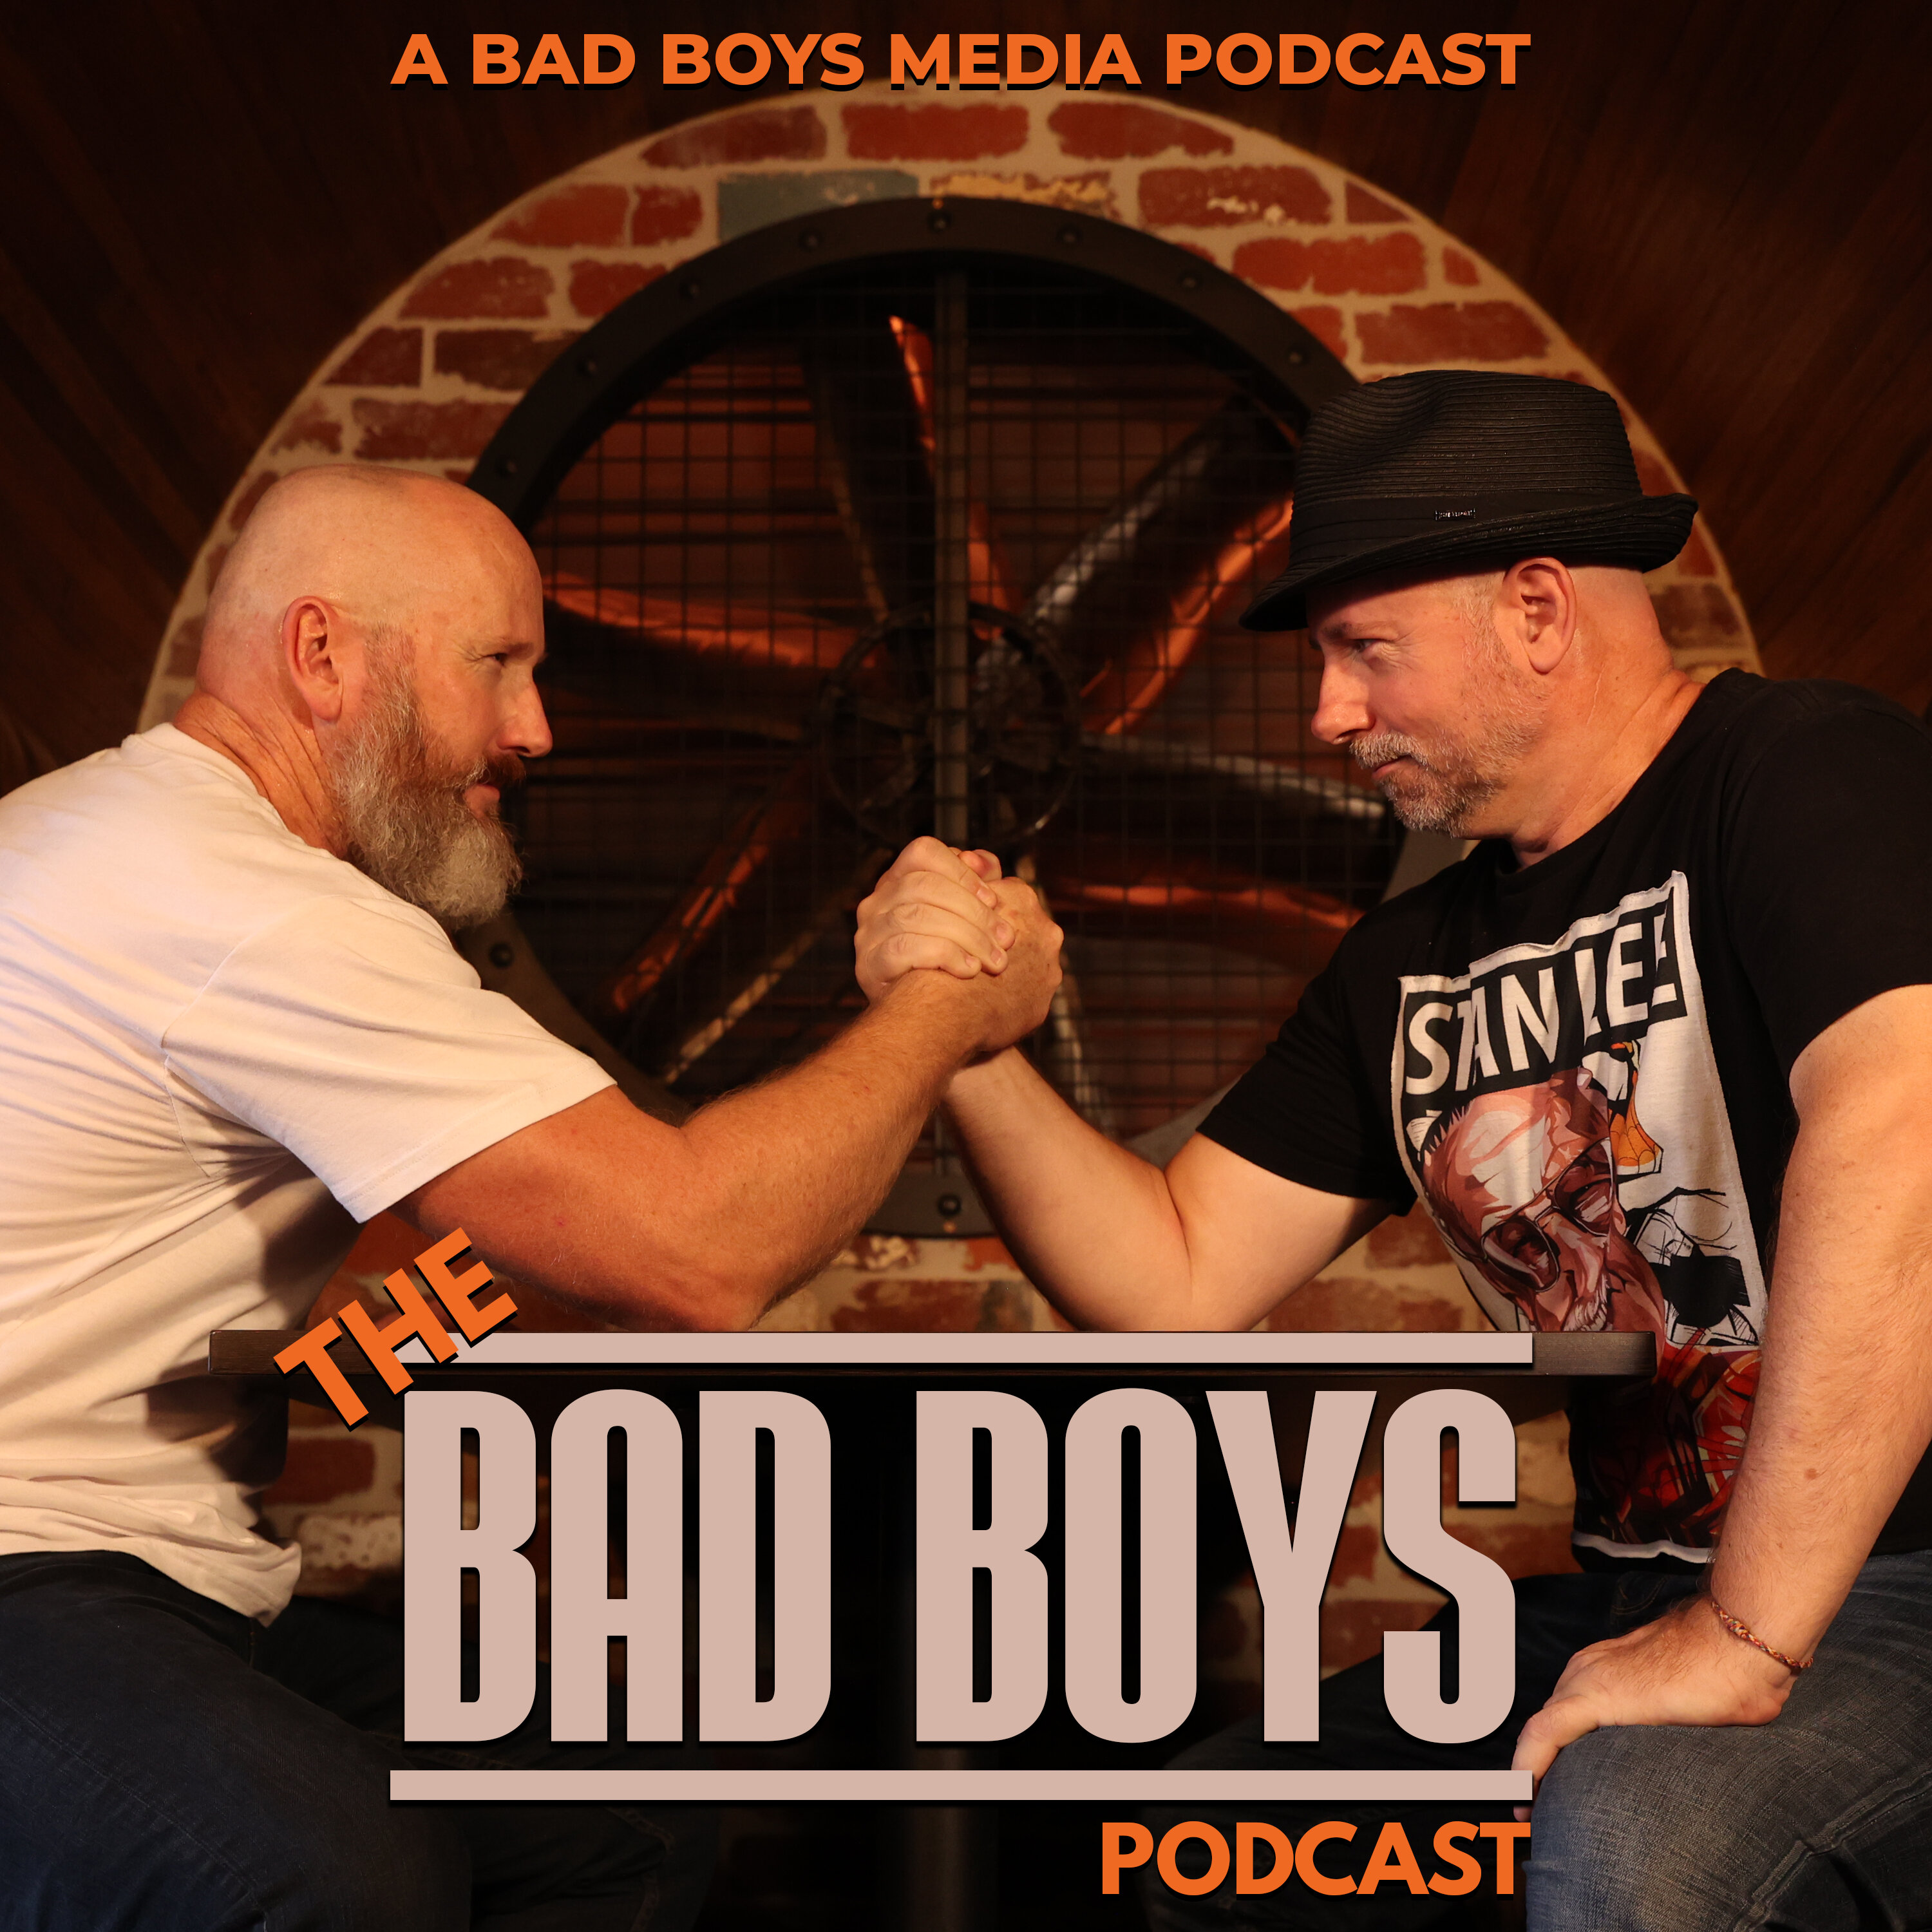 The Bad Boys Podcast podcast show image